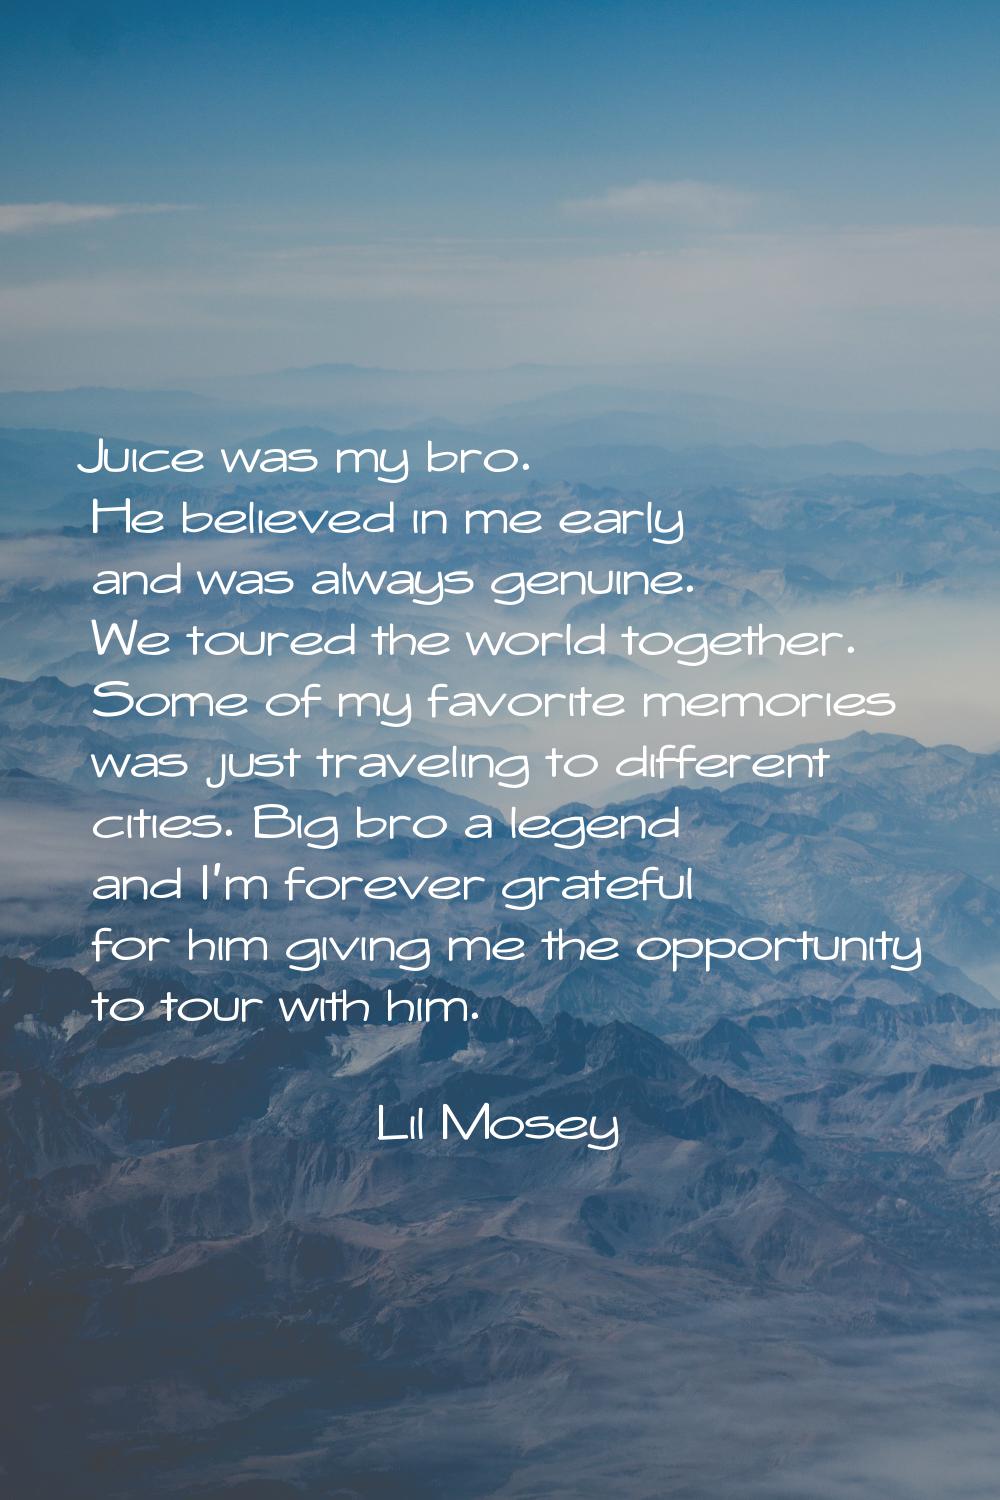 Juice was my bro. He believed in me early and was always genuine. We toured the world together. Som